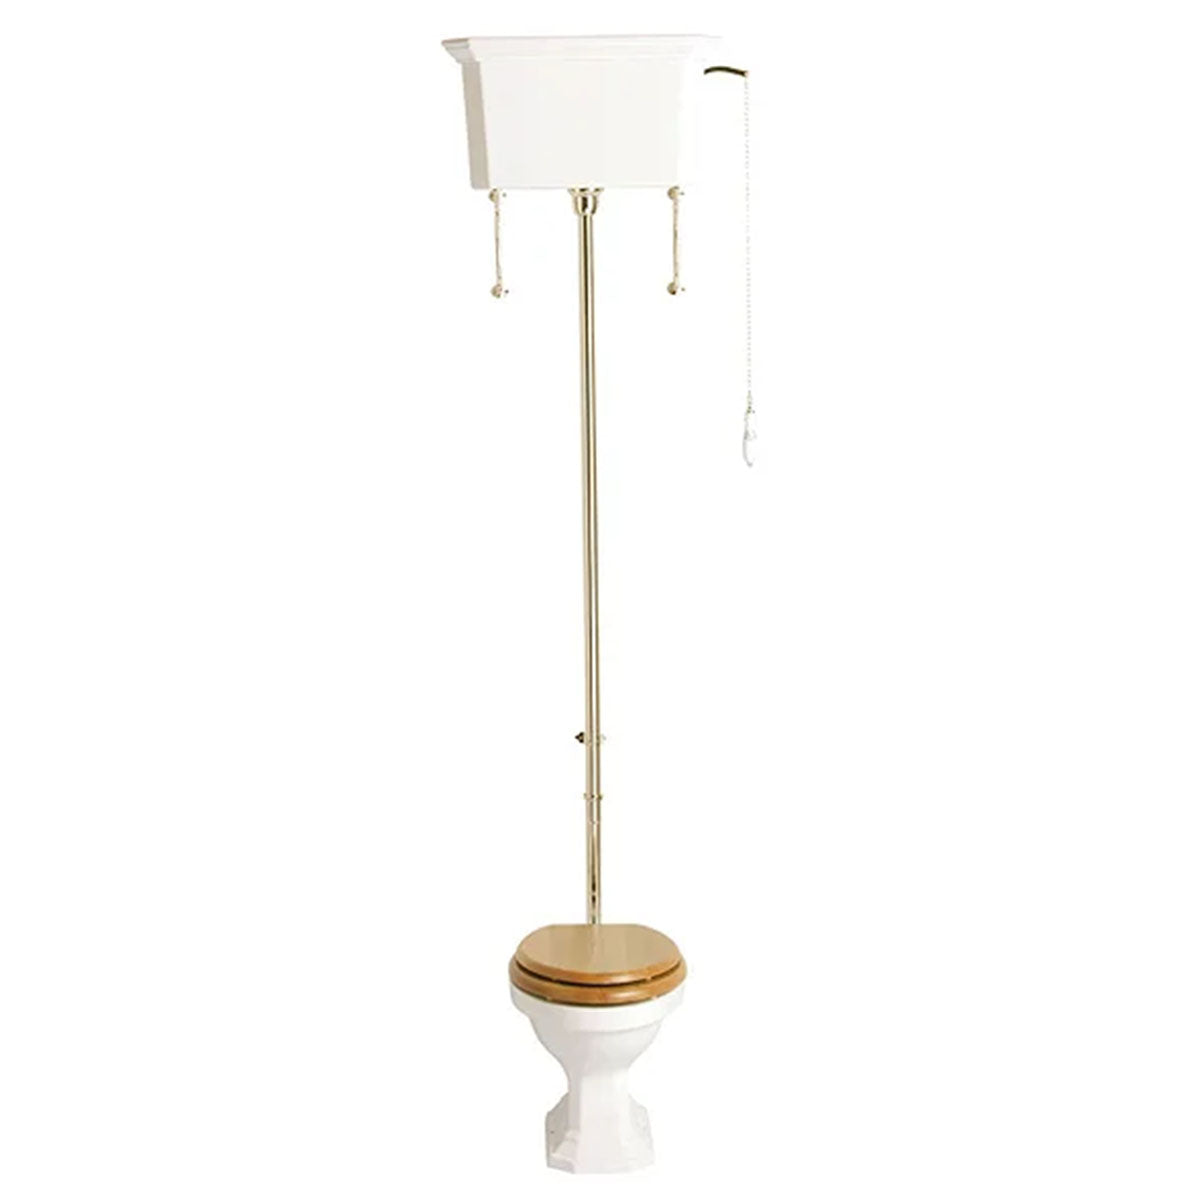 heritage granley high level toilet with standard wc pan gold